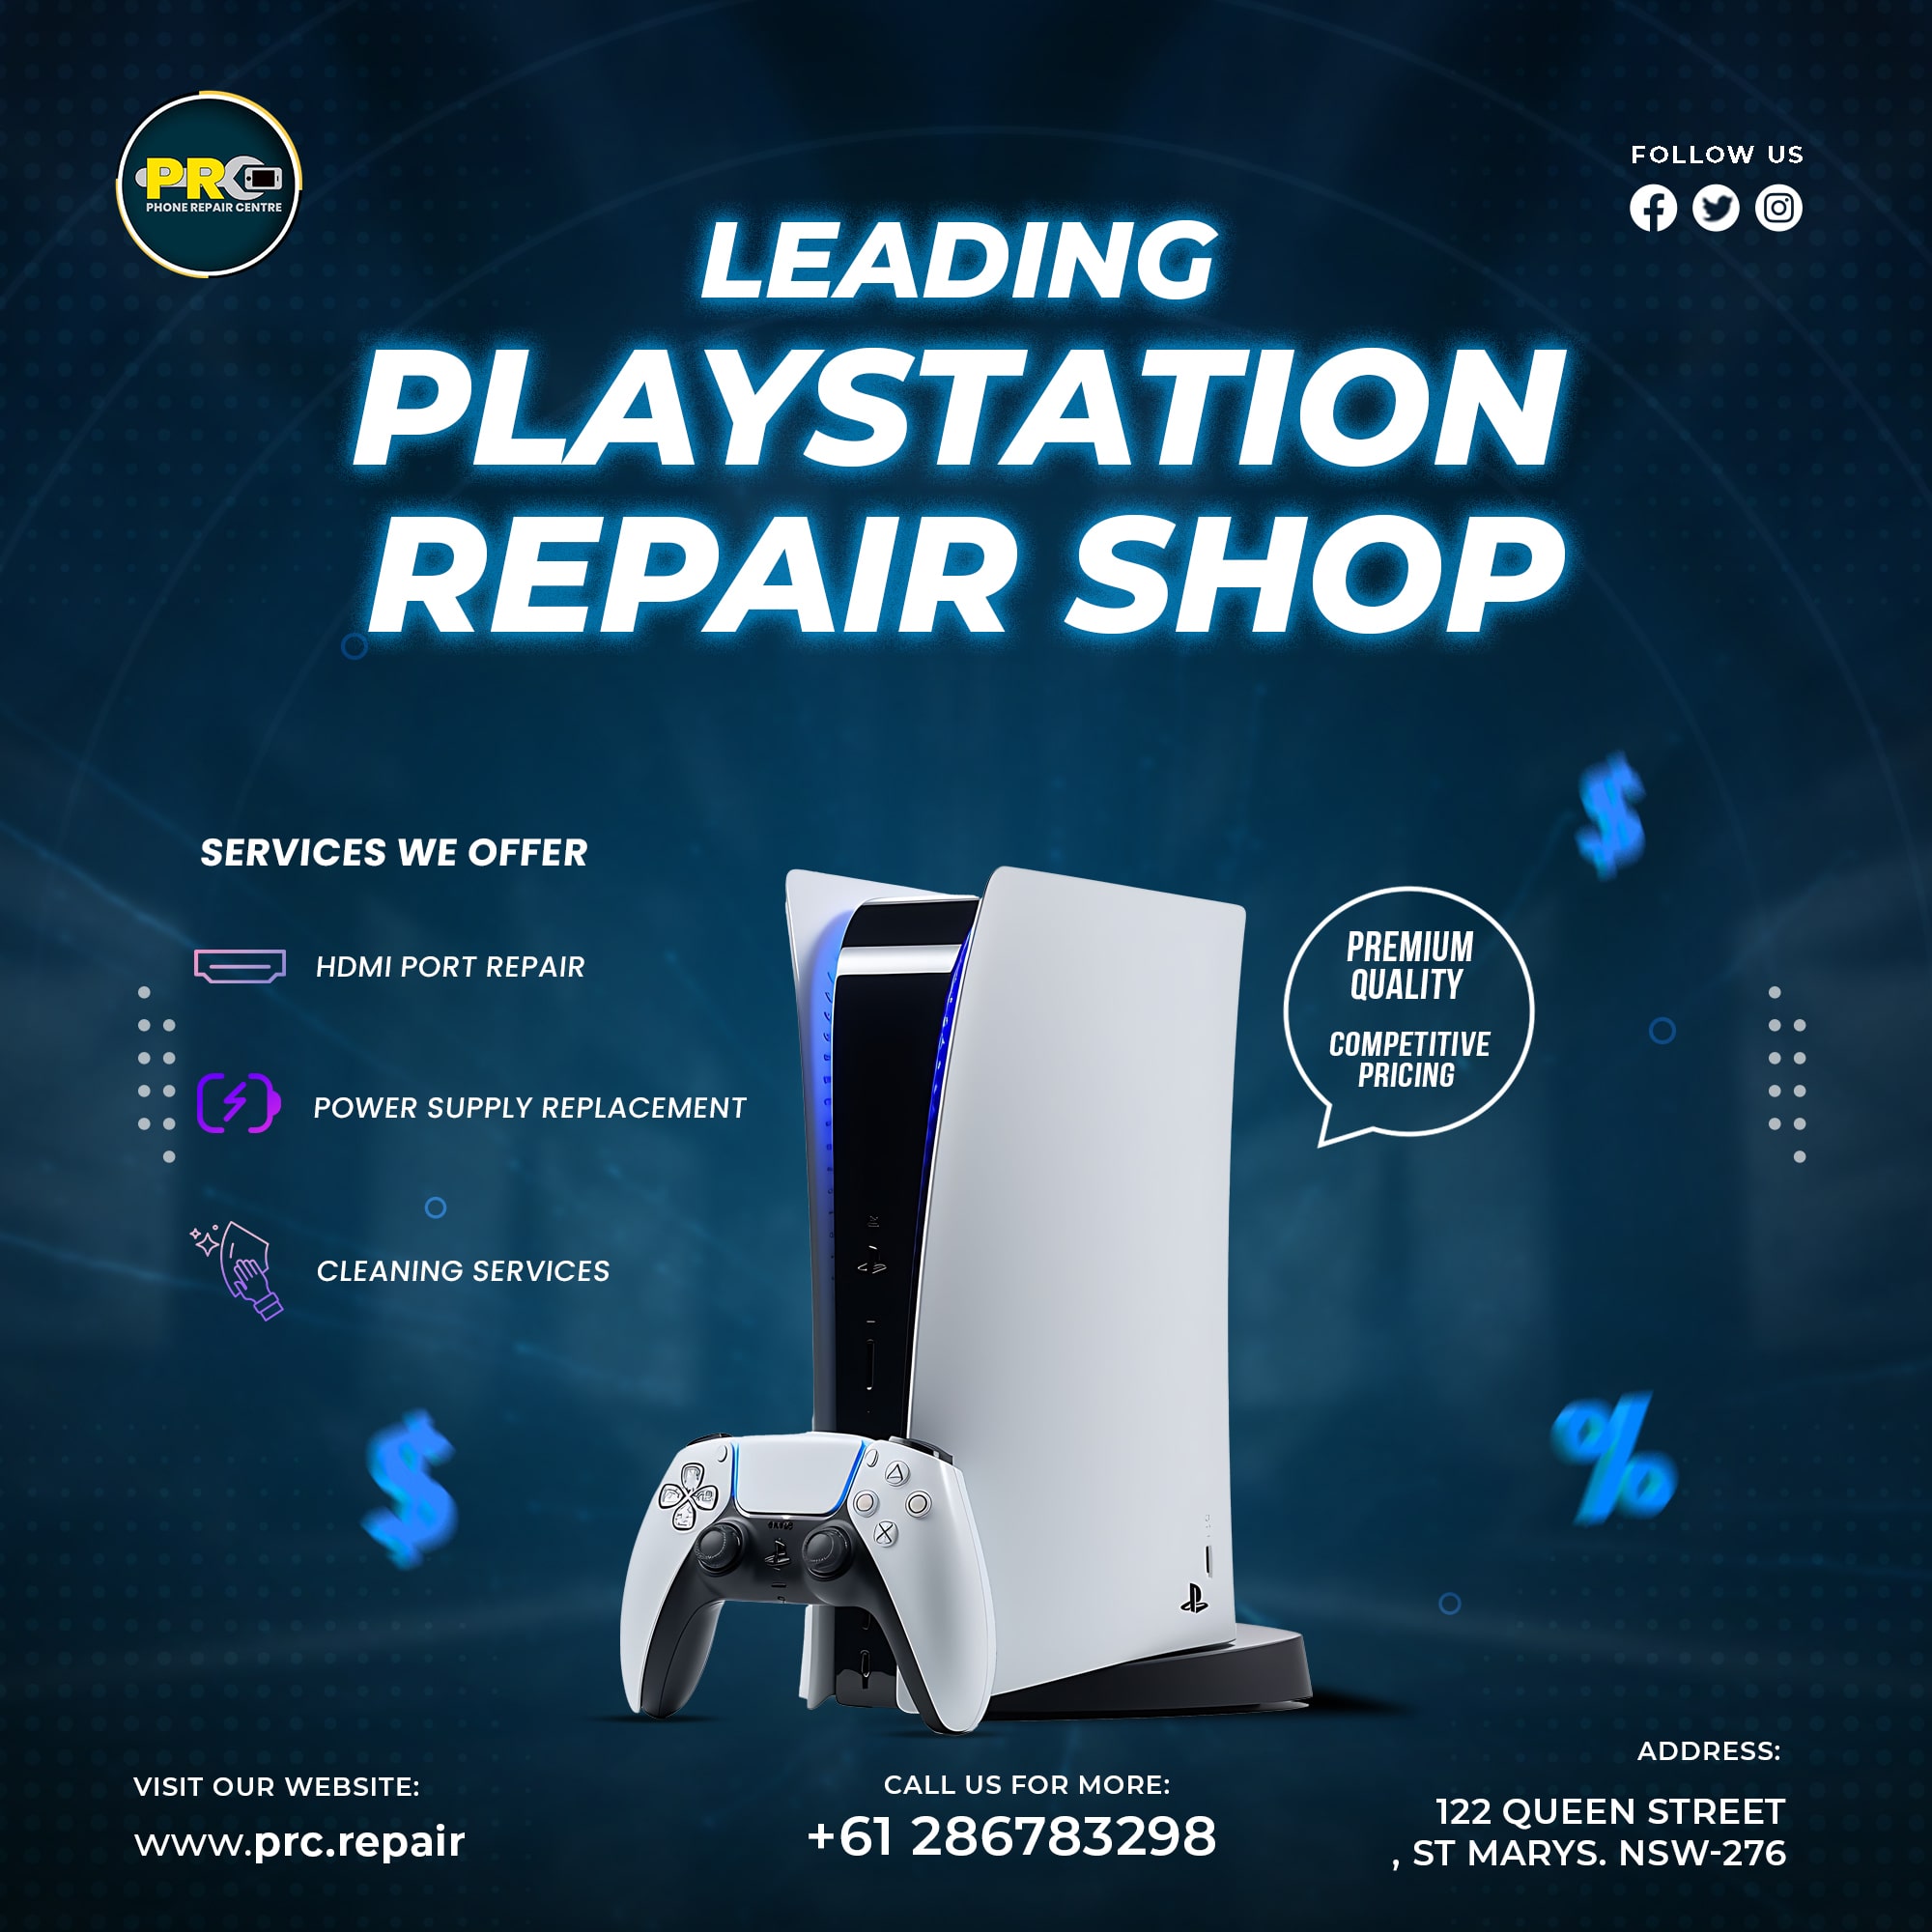  Game Console Repair Services in Sydney, NSW at Phone Repair Centre